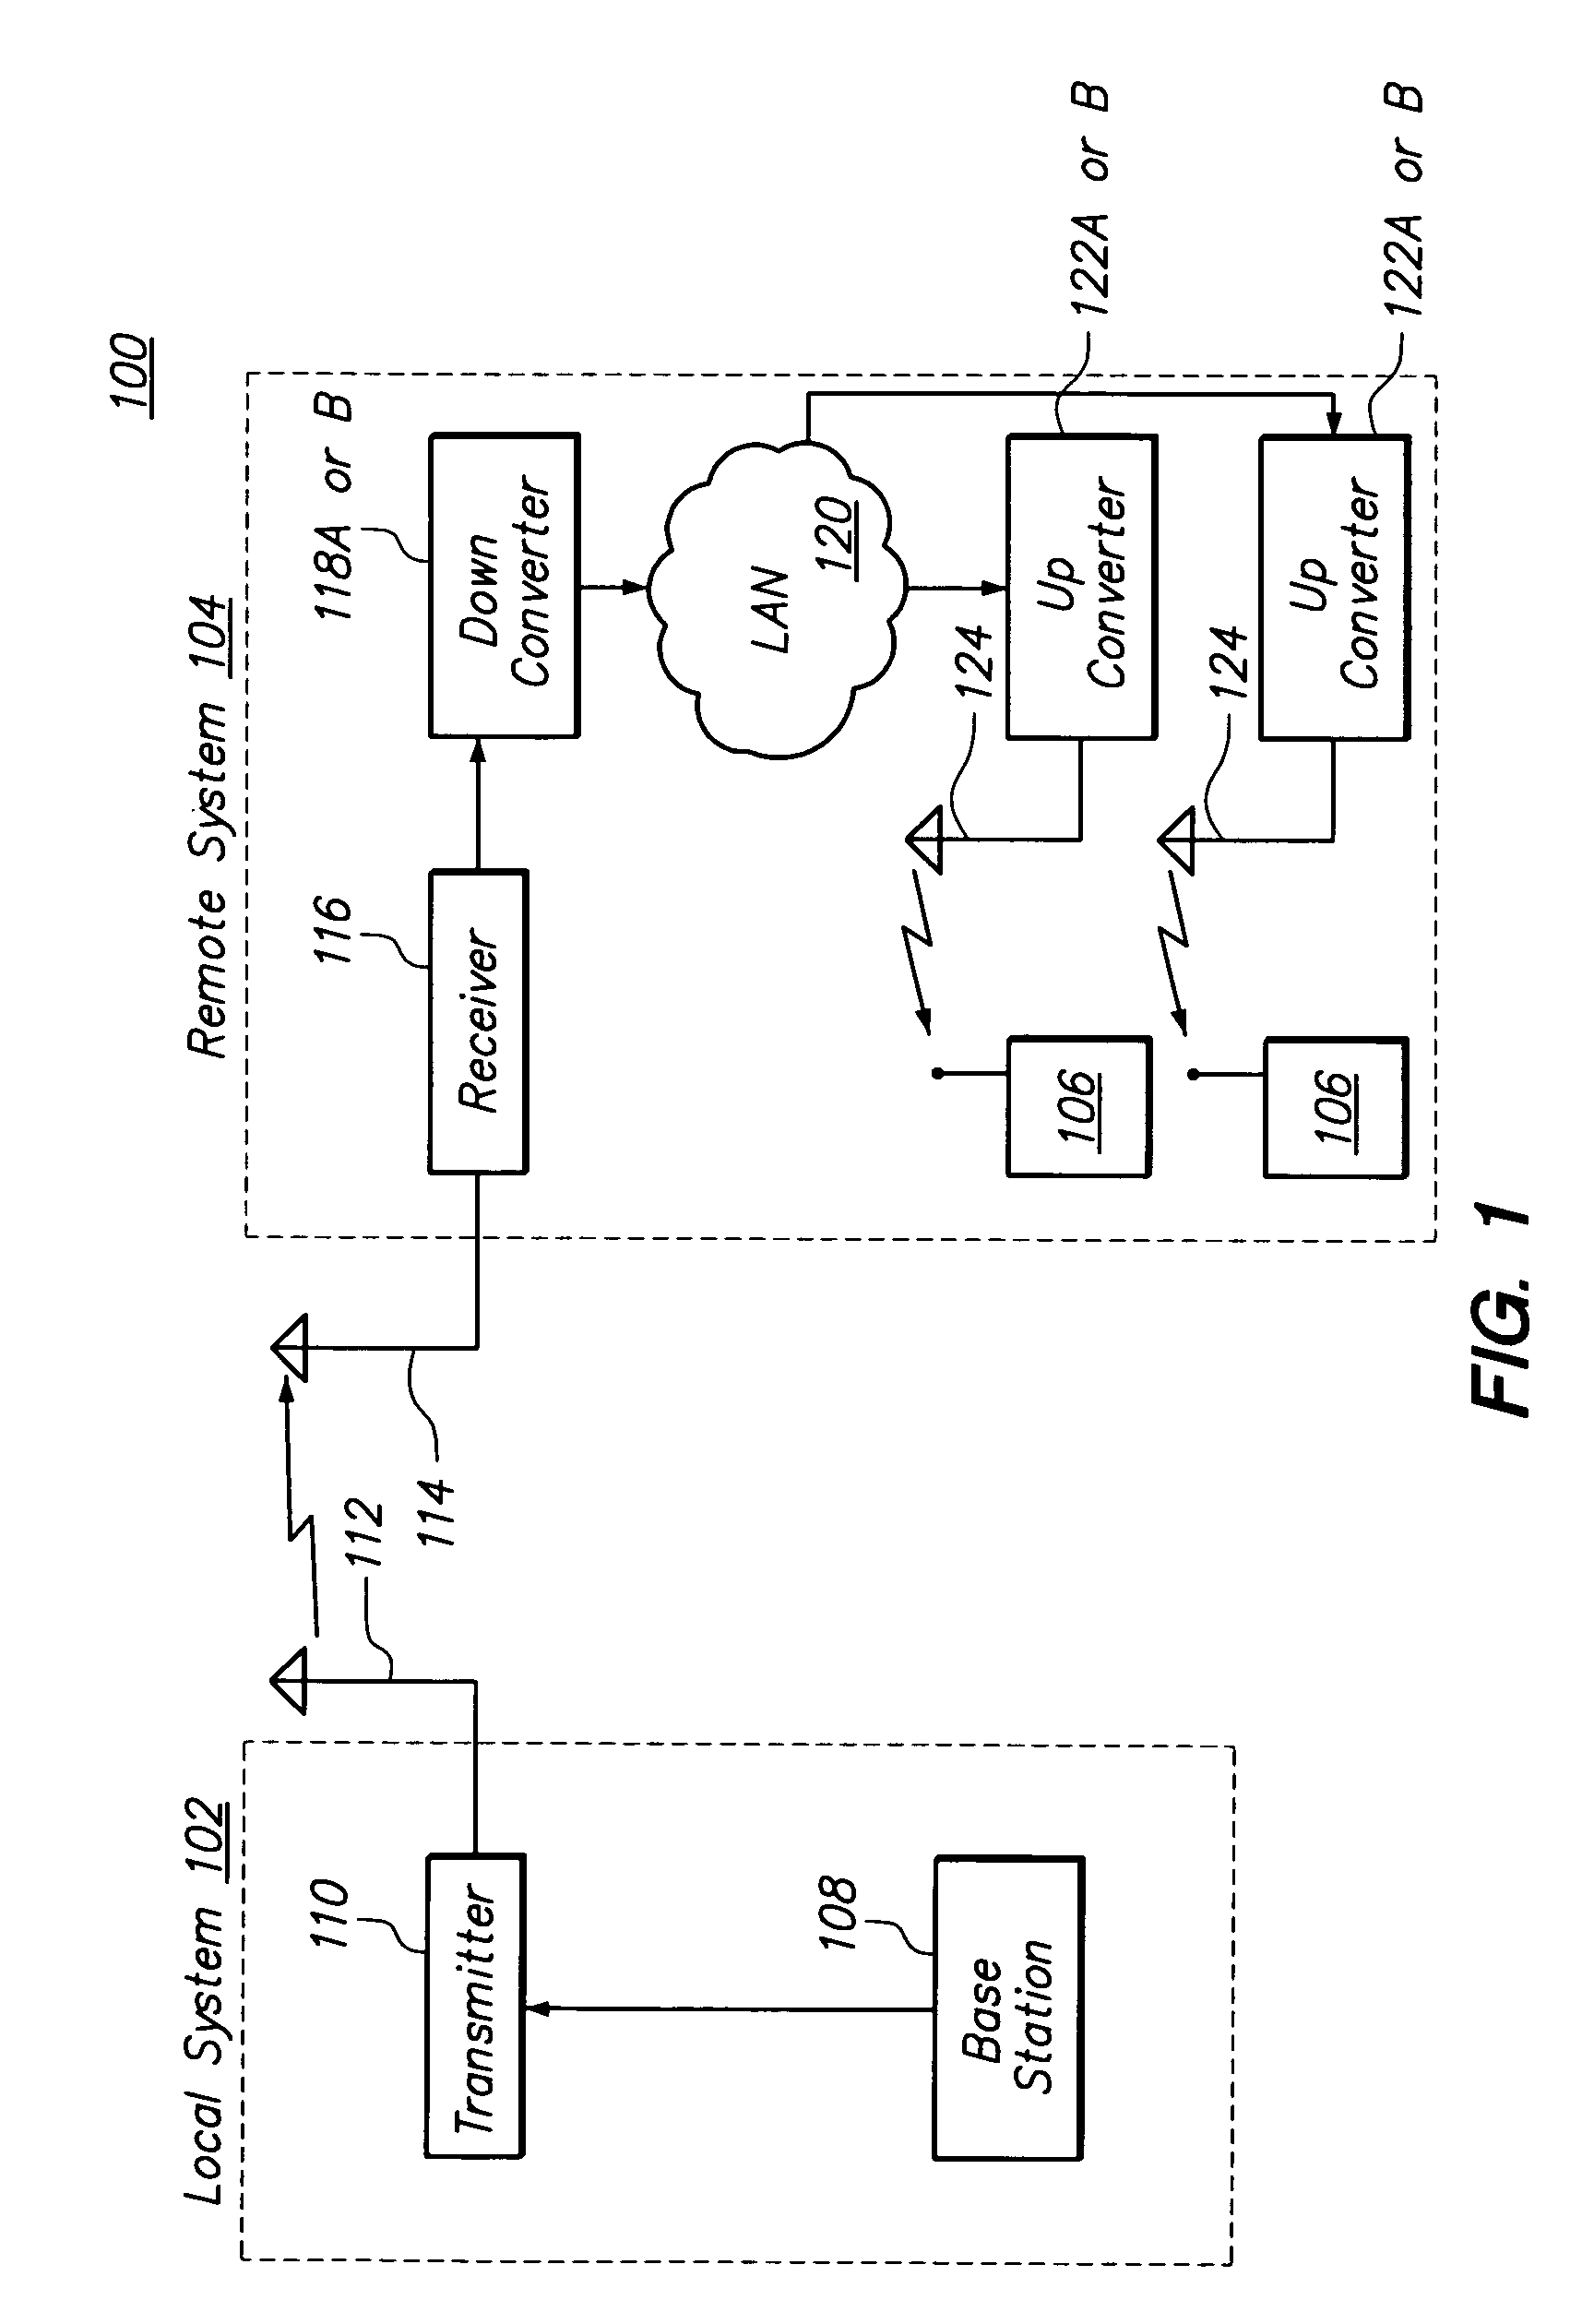 System for and method of providing remote coverage area for wireless communications